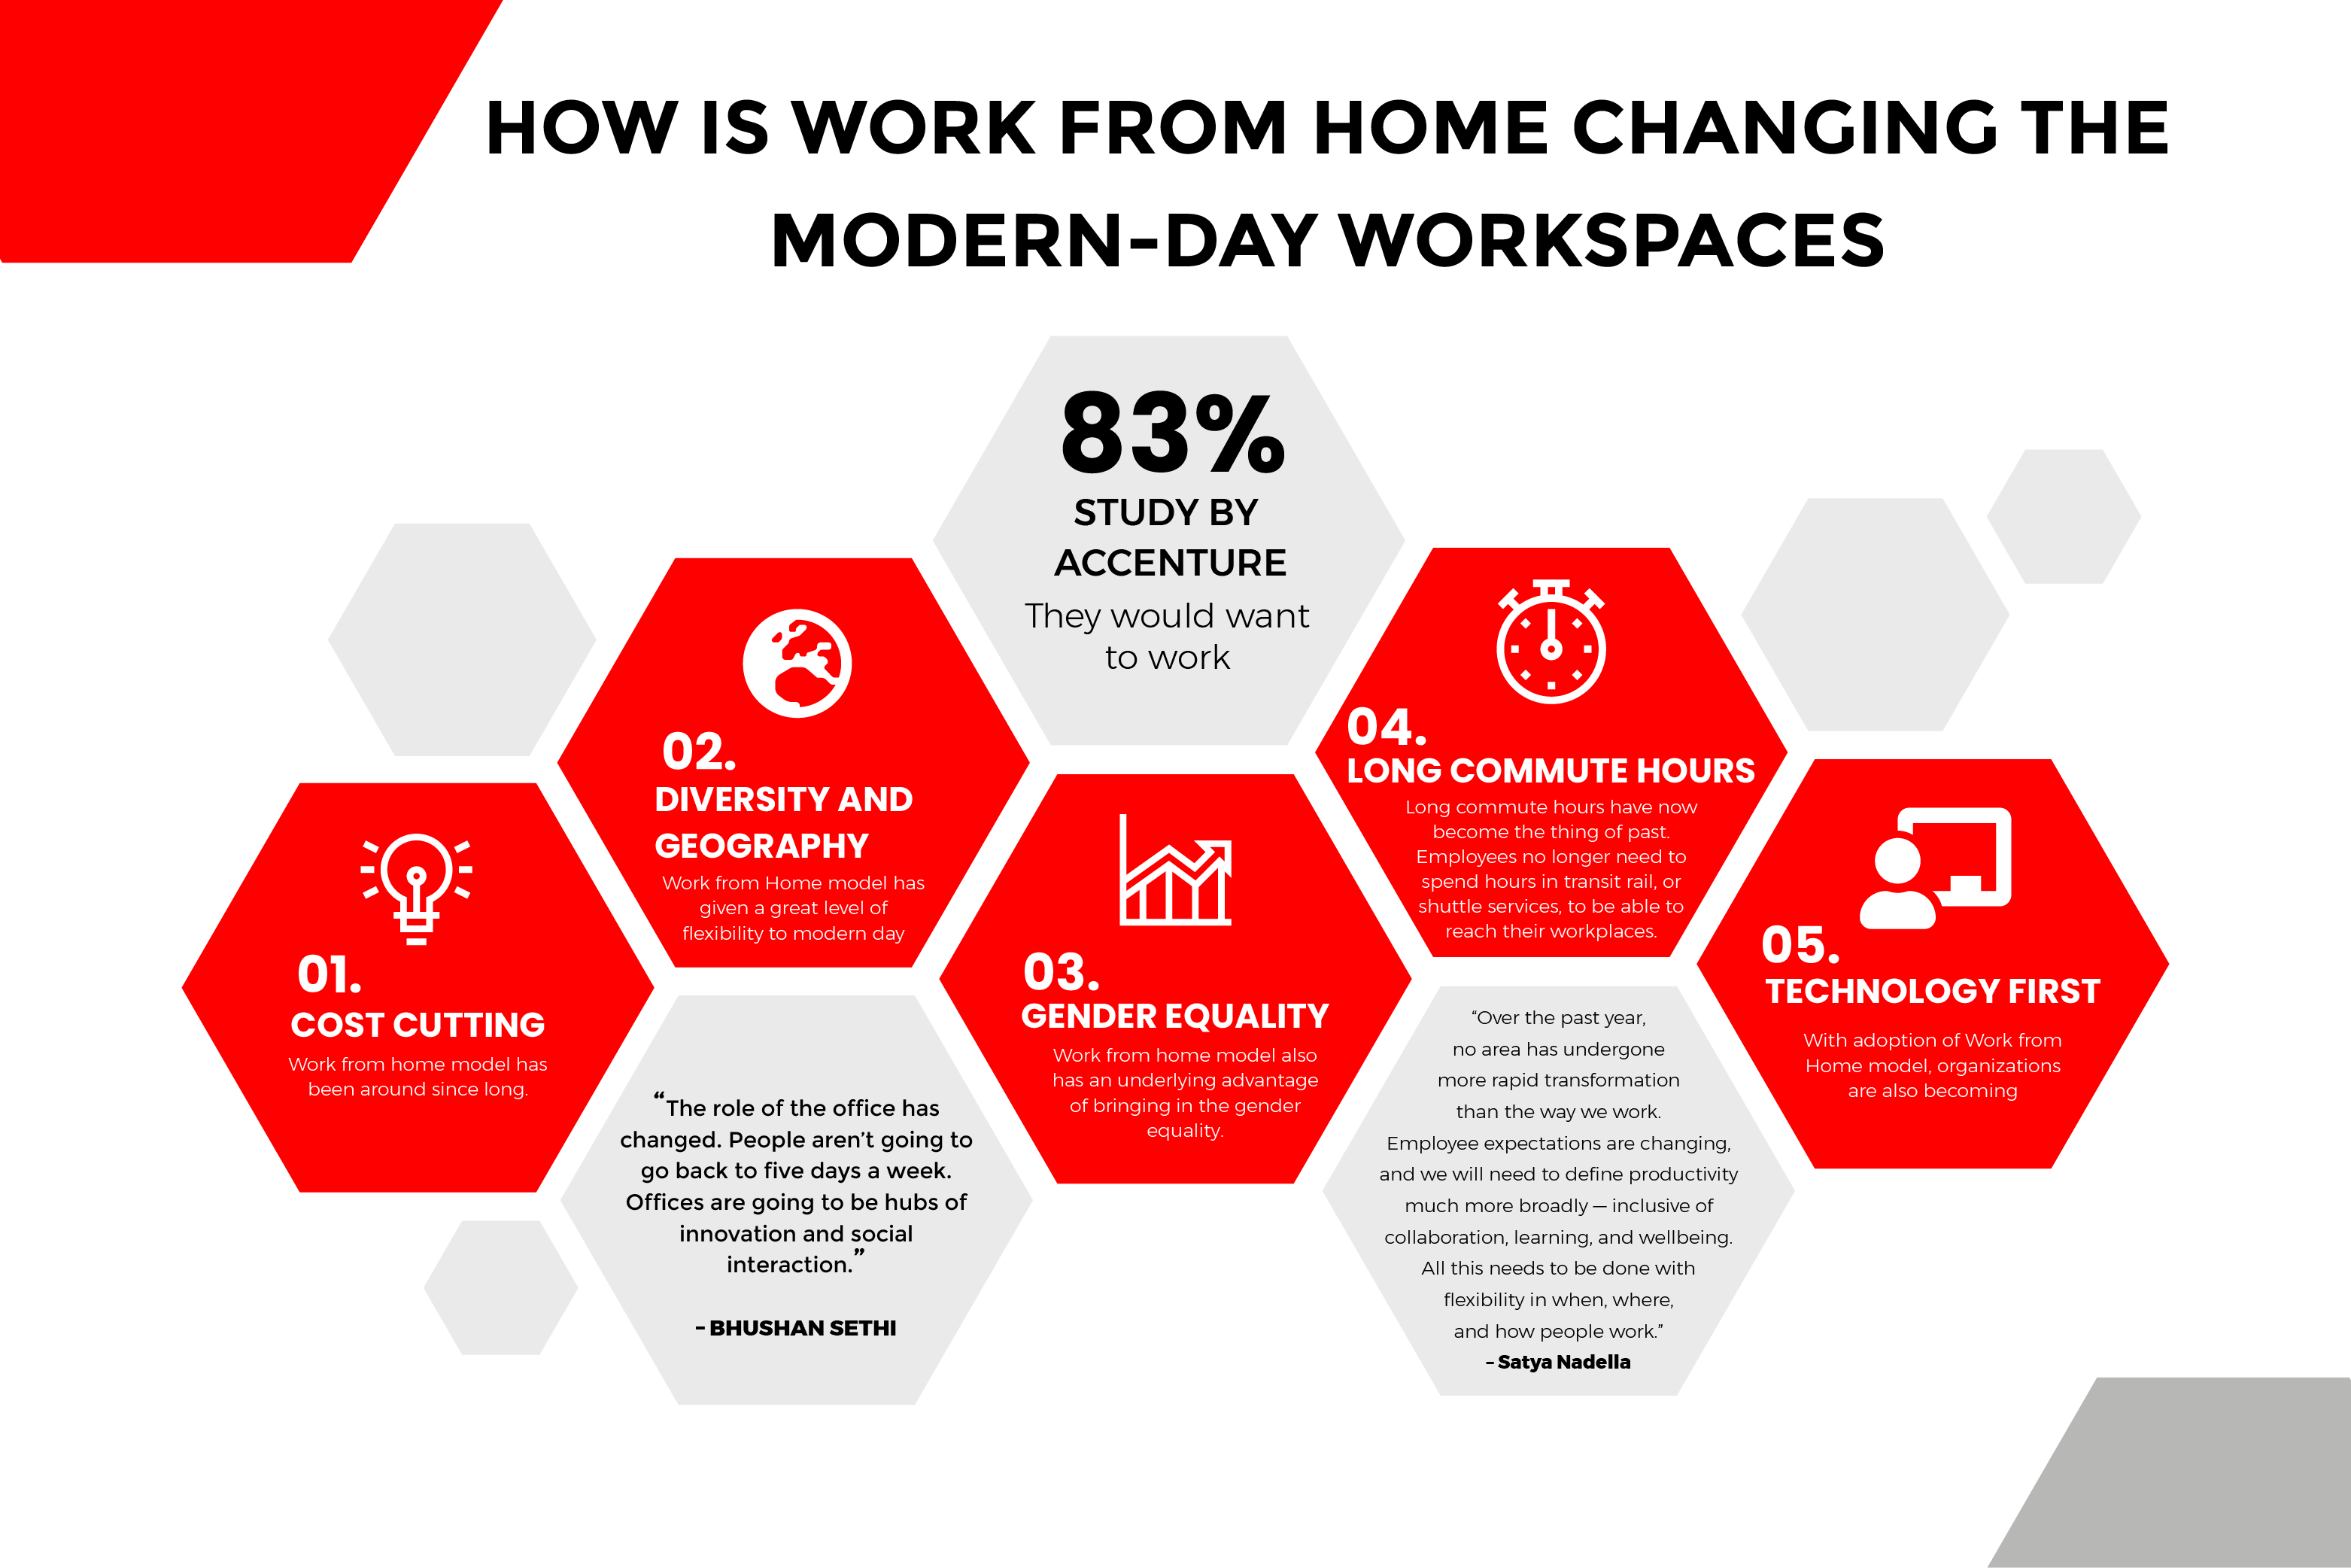 How is Work From Home changing the modern-day workspaces